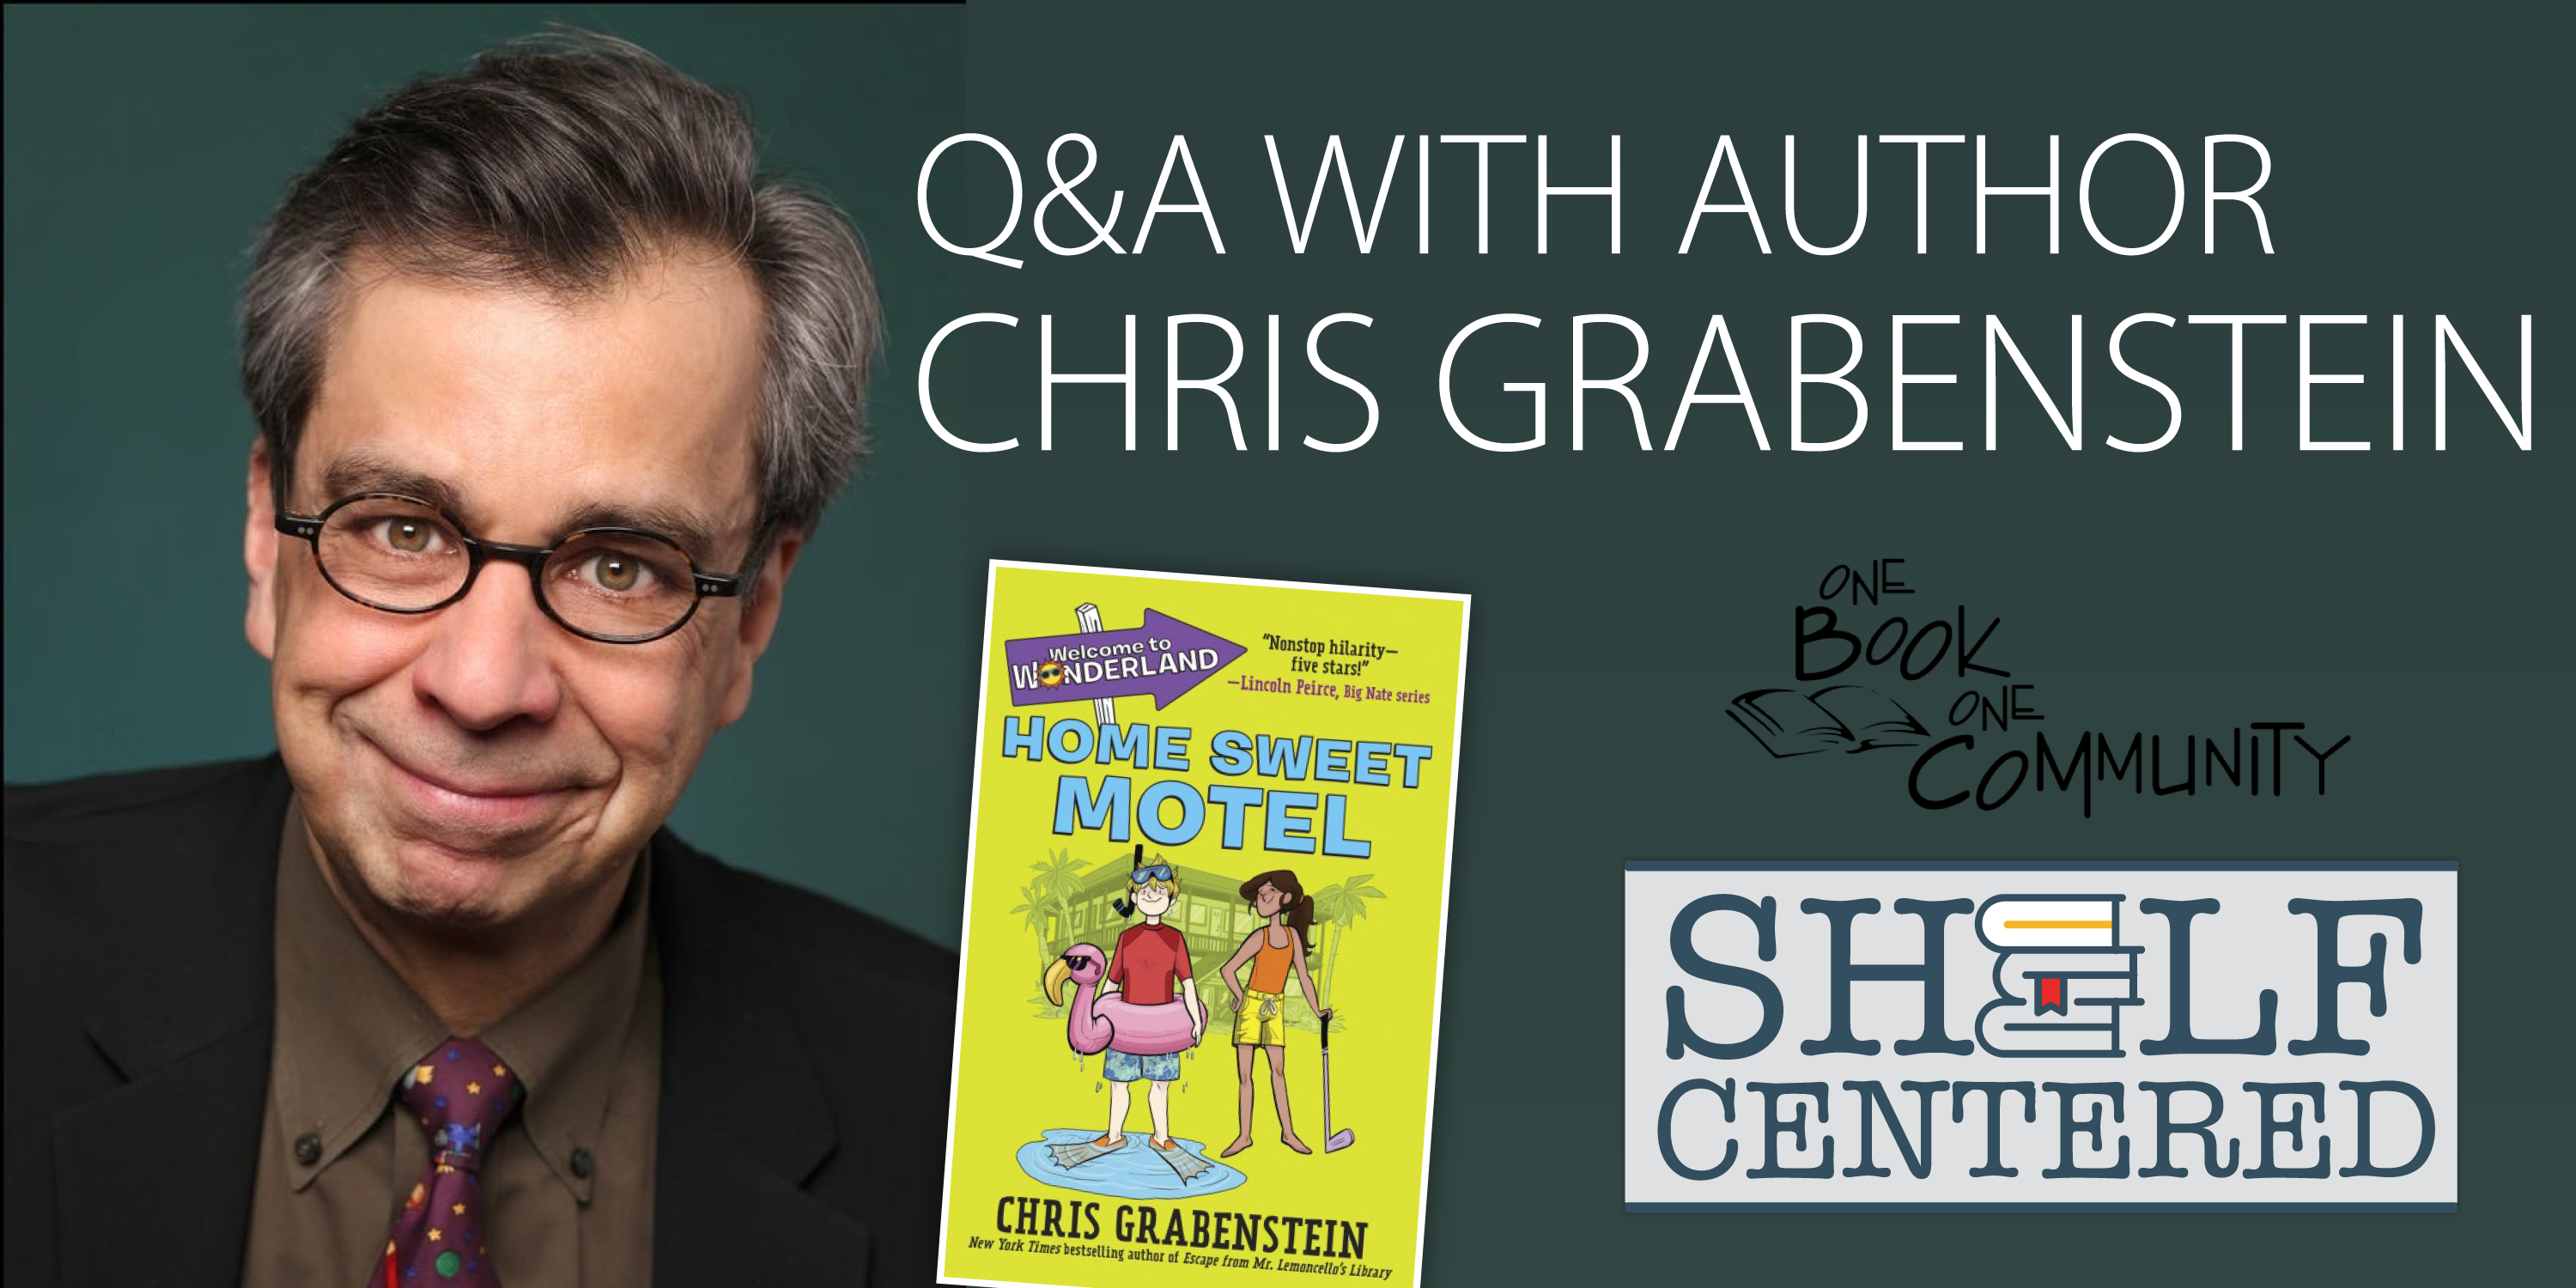 Q&A with Chris Grabenstein - Home Sweet Motel - One Book, One Community - Shelf Centered